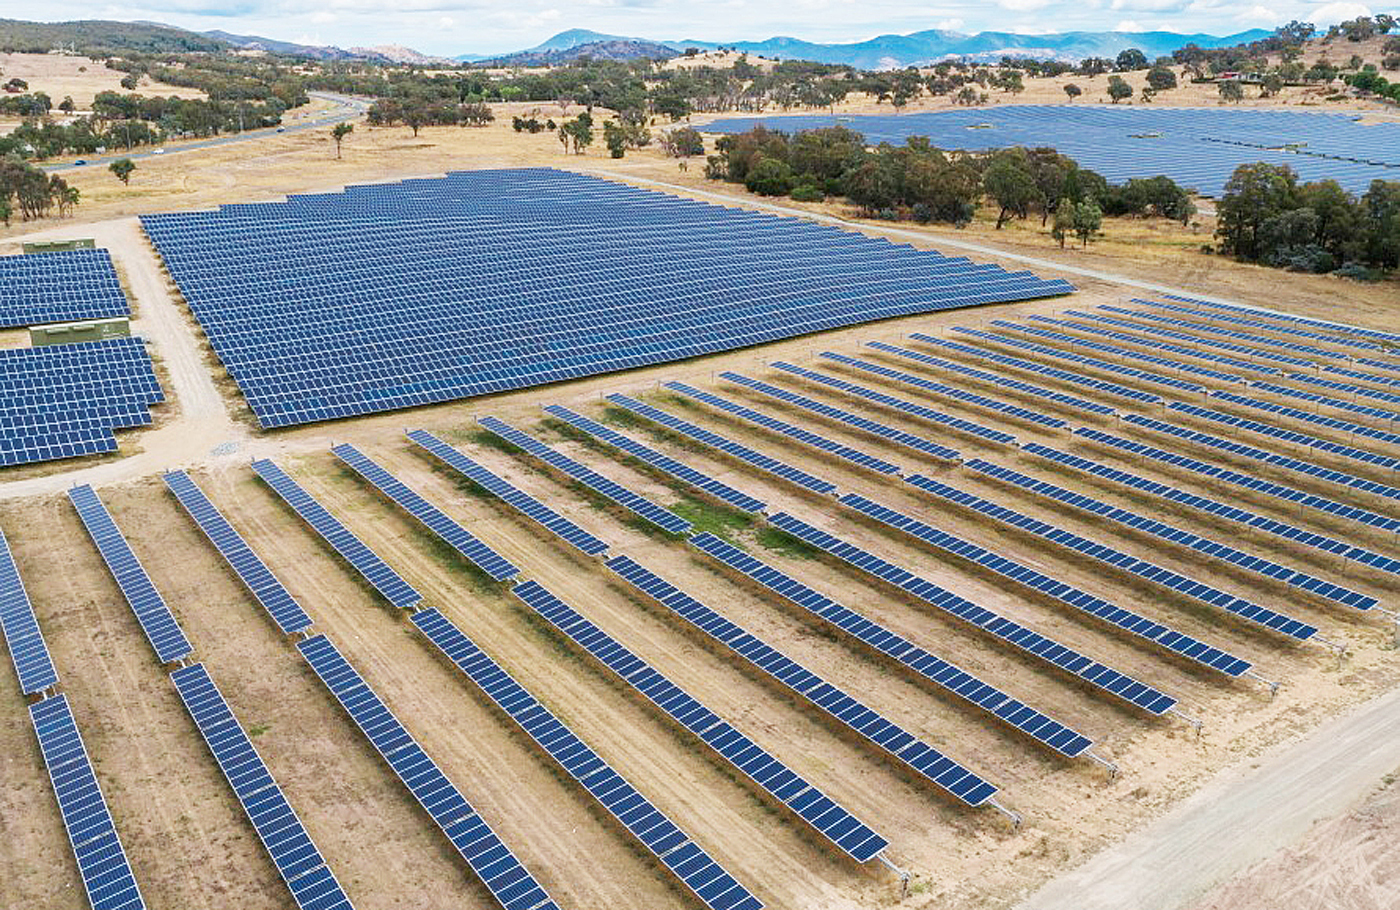 At its current rate, Australia is on track for 50% renewable electricity in 2025